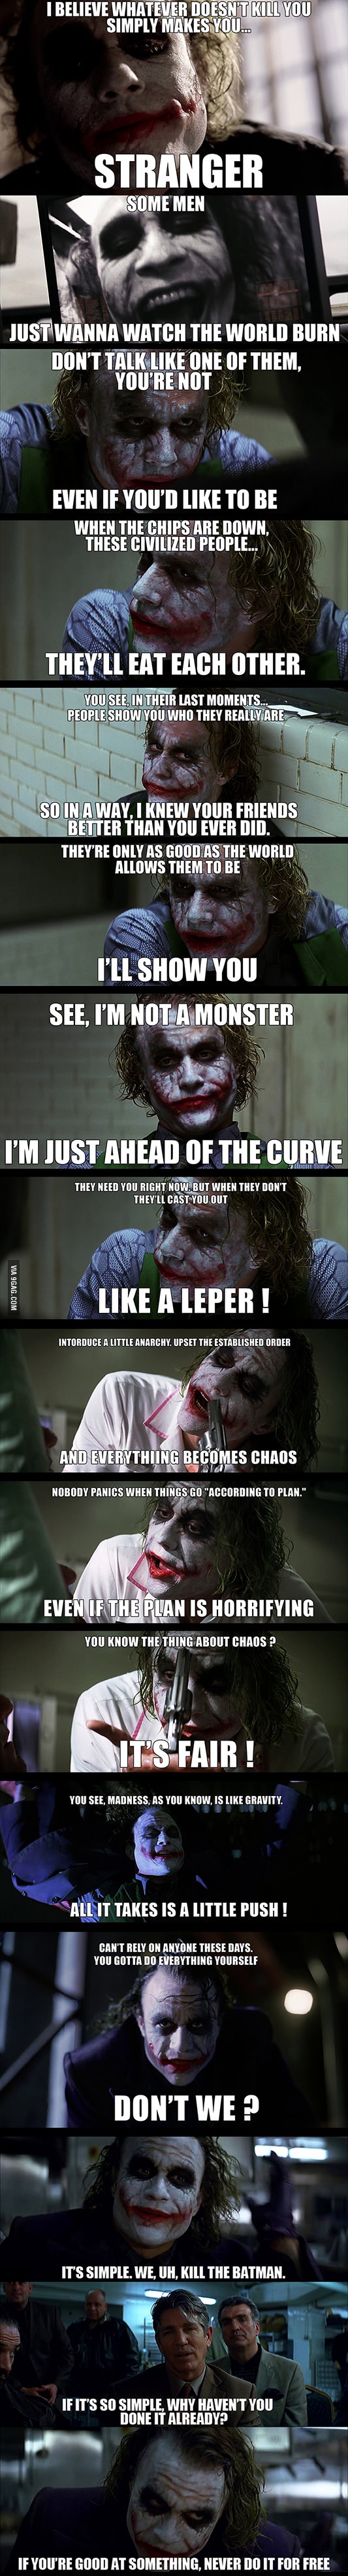 after re-watching the dark knight i realize joker has a point about humans